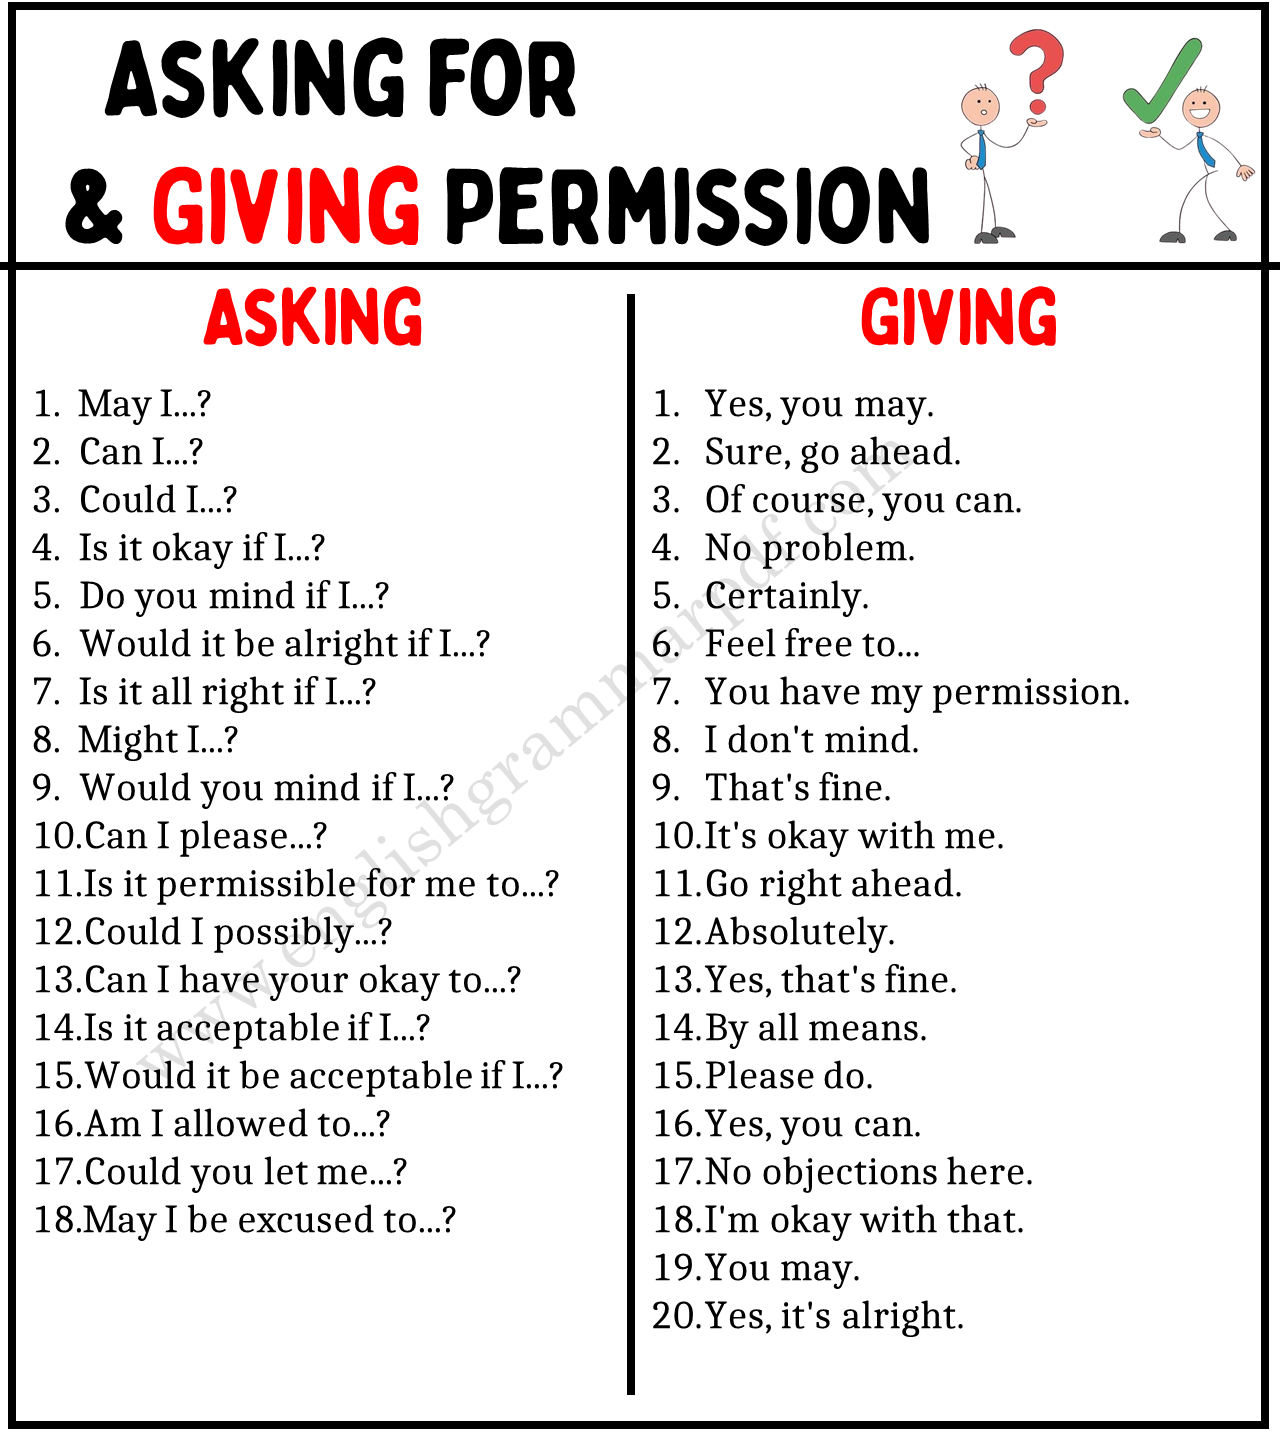 Asking for and Giving Permission